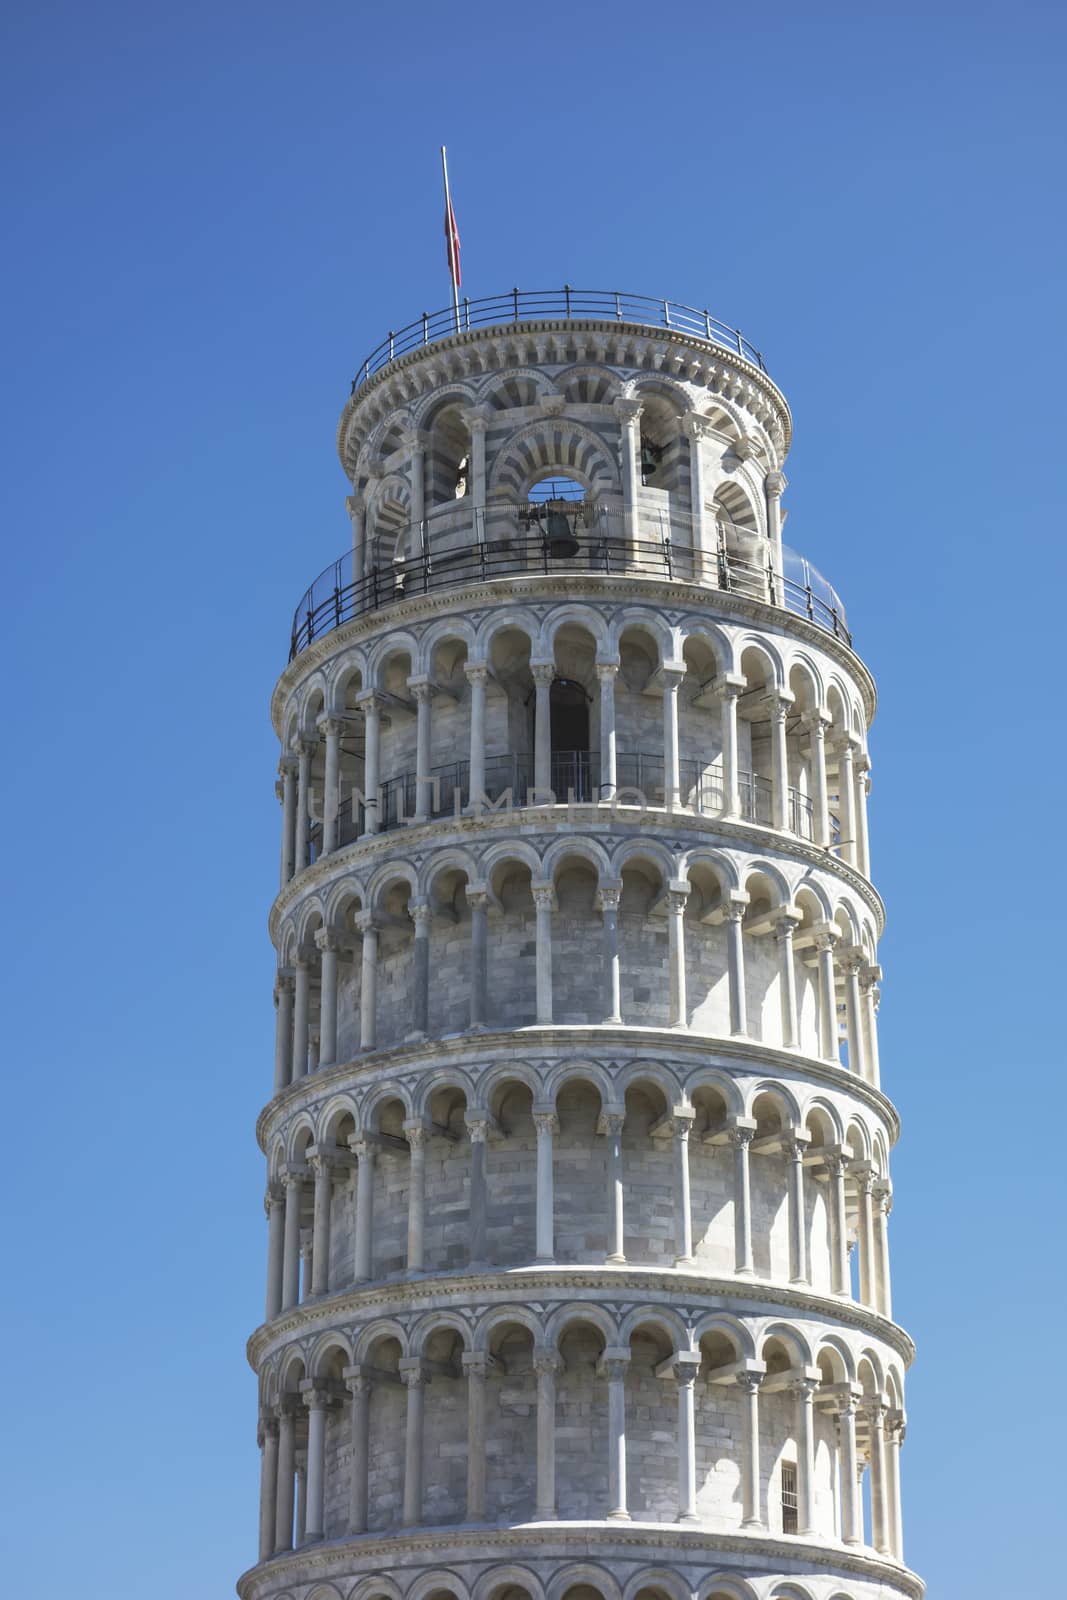 Pisa Leaning Tower by ibphoto